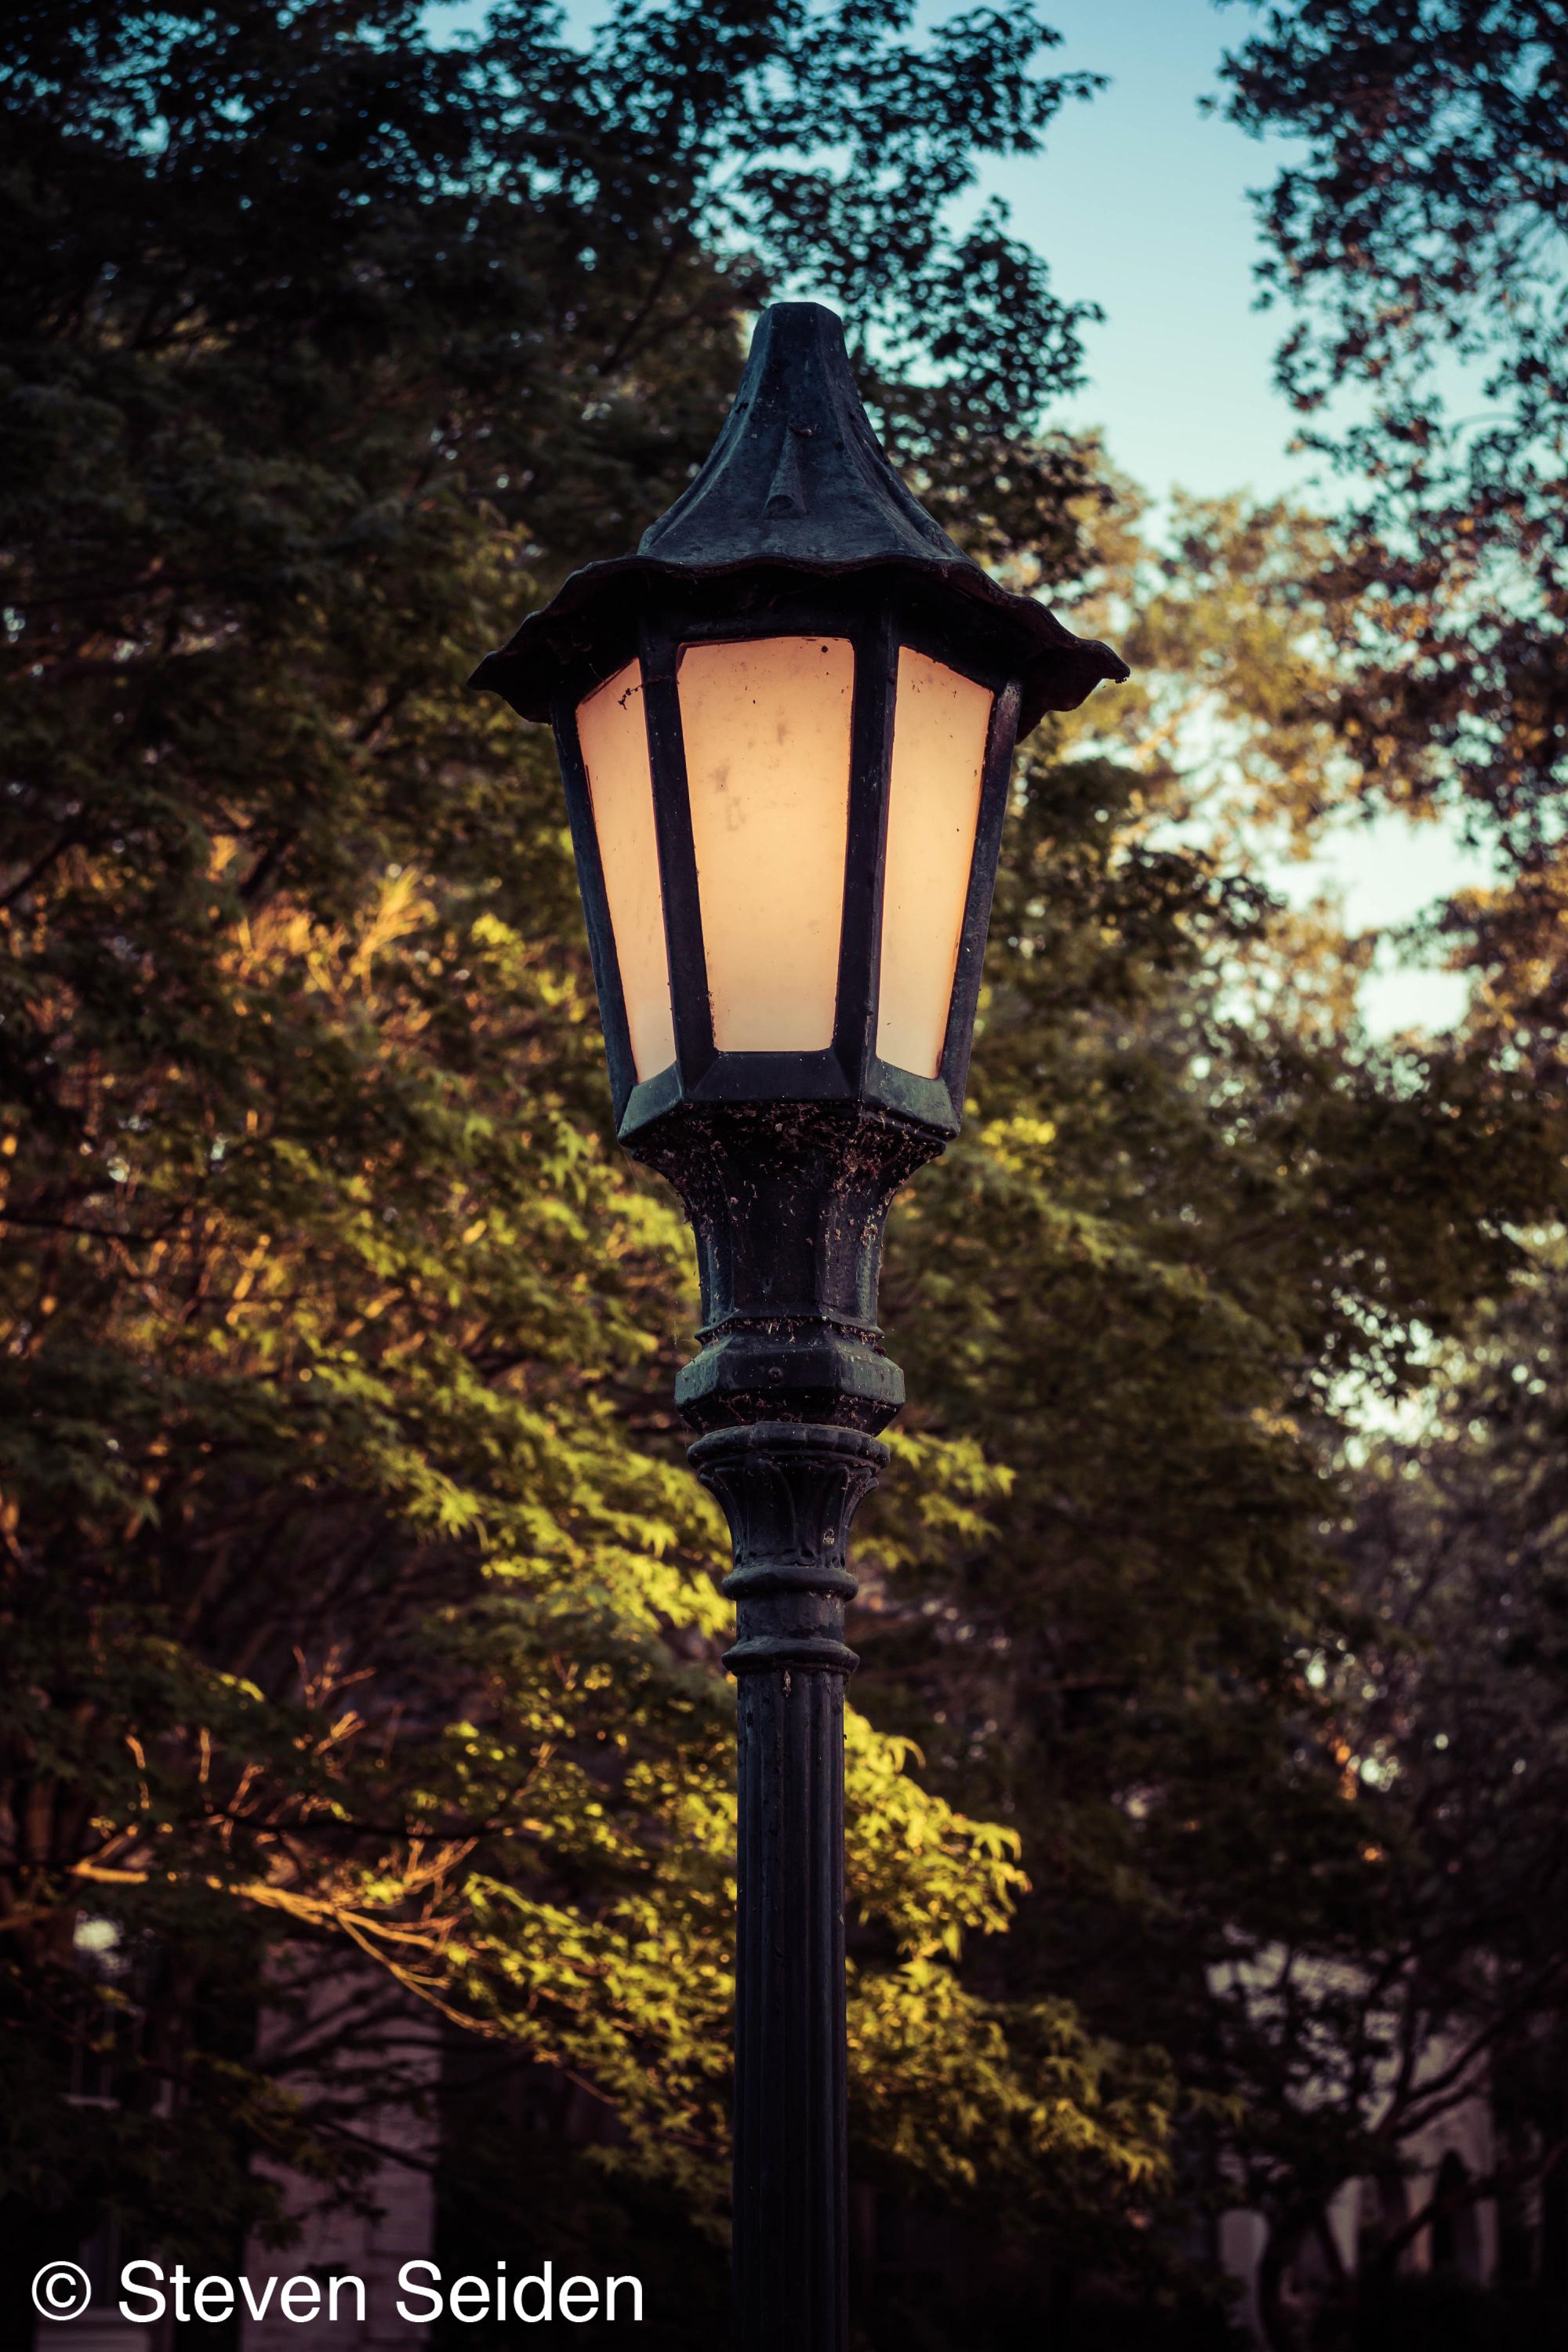 A picture of a vintage streetlamp.